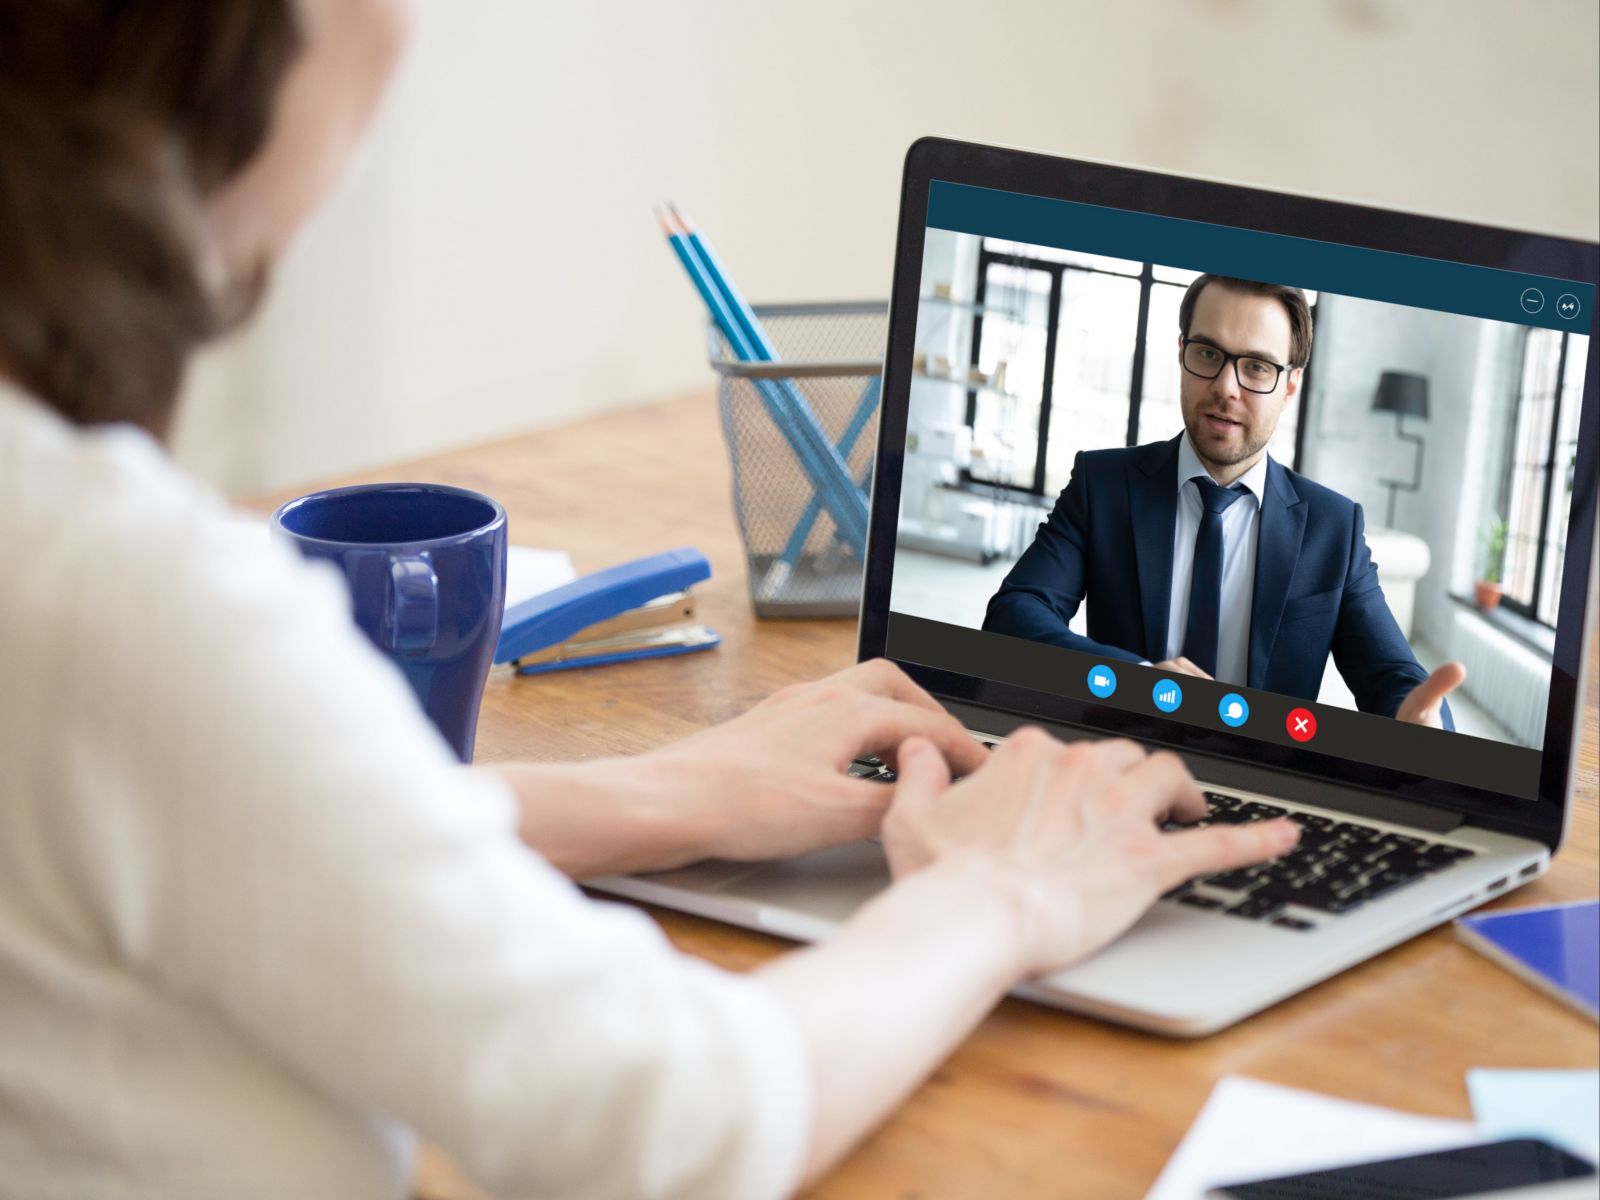 The secret to effective communication with remote employees